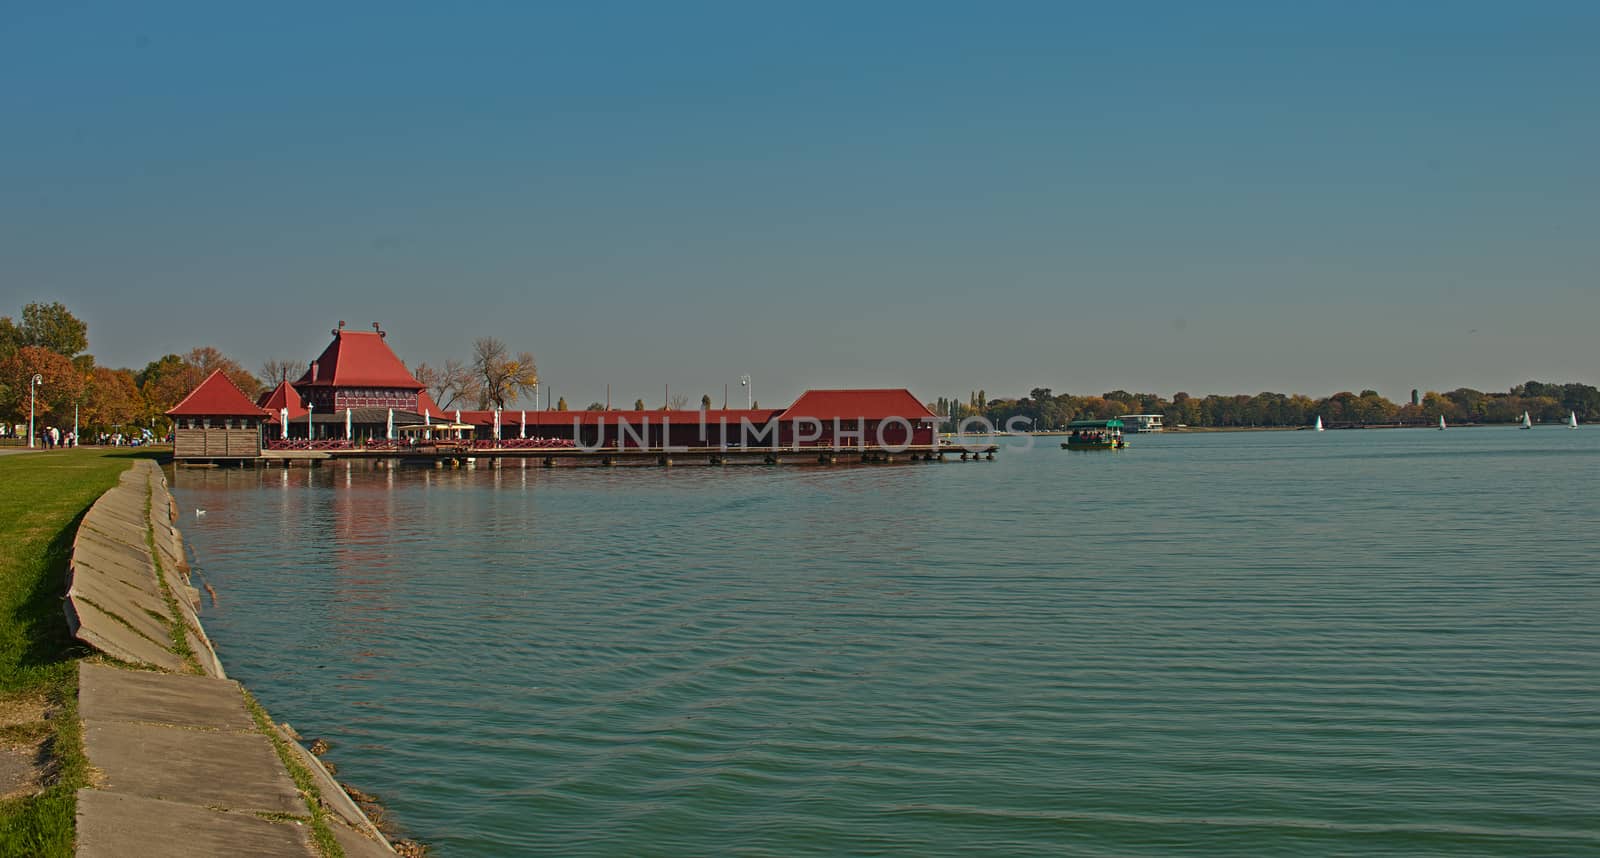 Touristic complex with pier on Palic lake, Serbia by sheriffkule